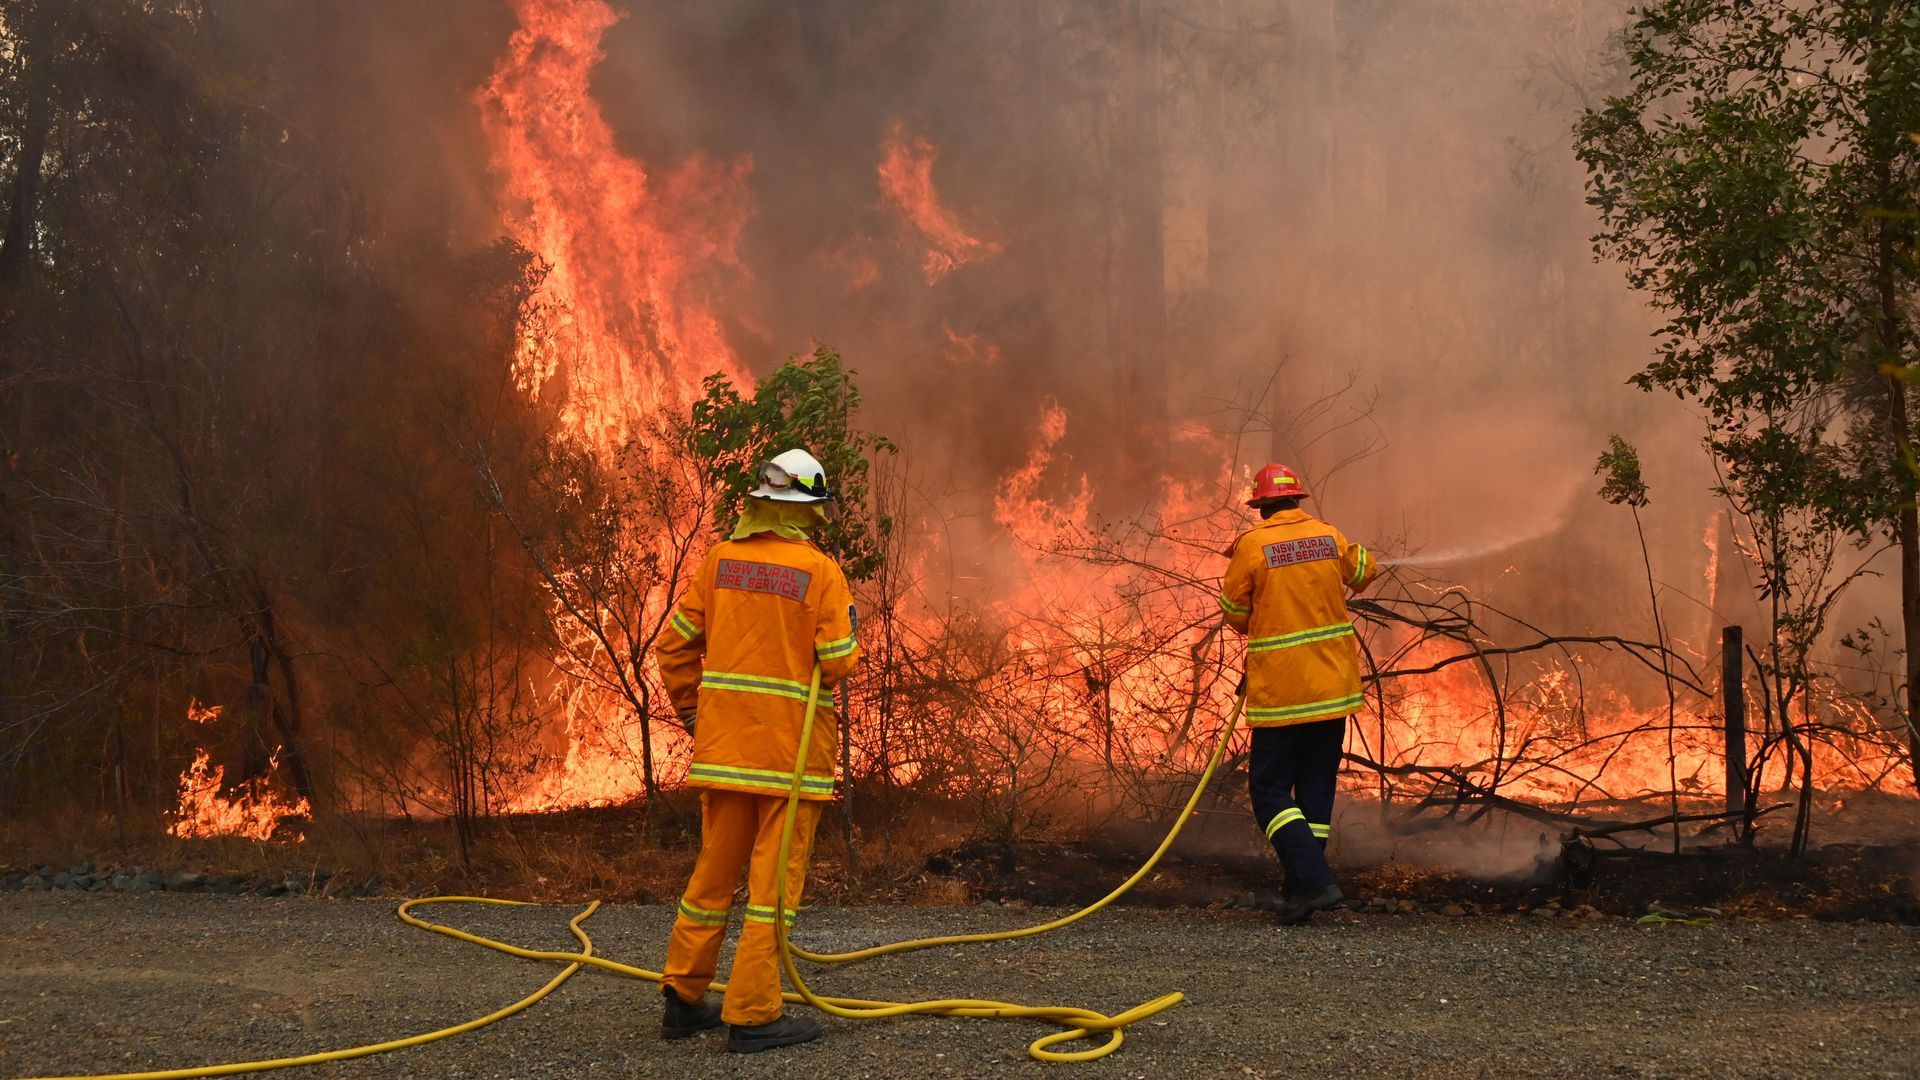 Firefighters tackle a wildfire that's threatening a home in Taree, north of Sydney.